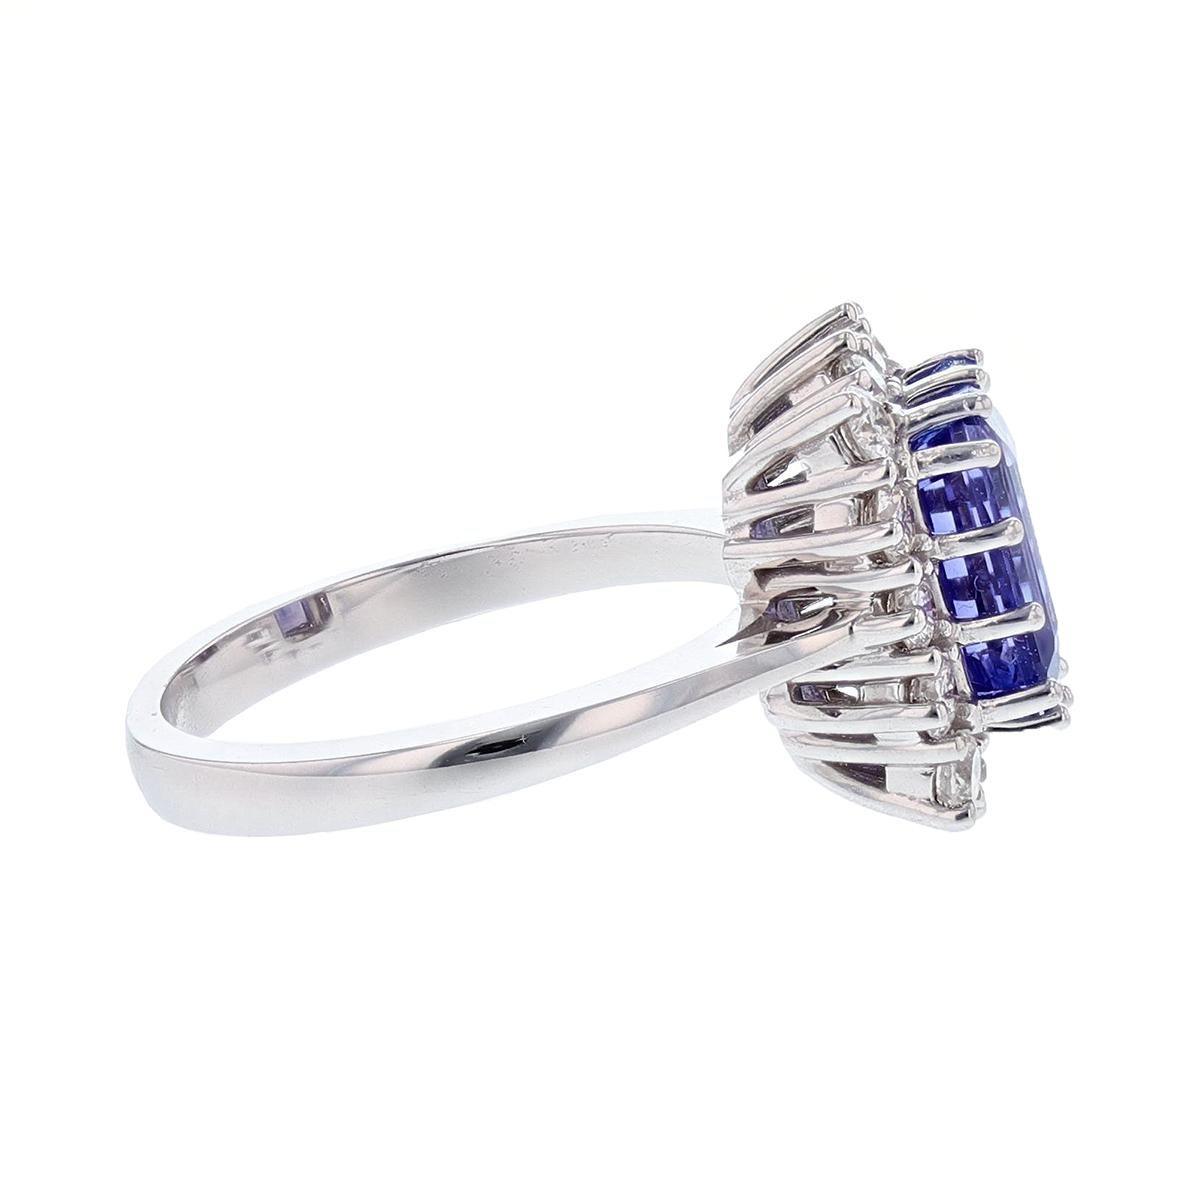 14 Karat White Gold 2.88 Carat Emerald Cut Tanzanite and Diamond Ring In New Condition For Sale In Houston, TX